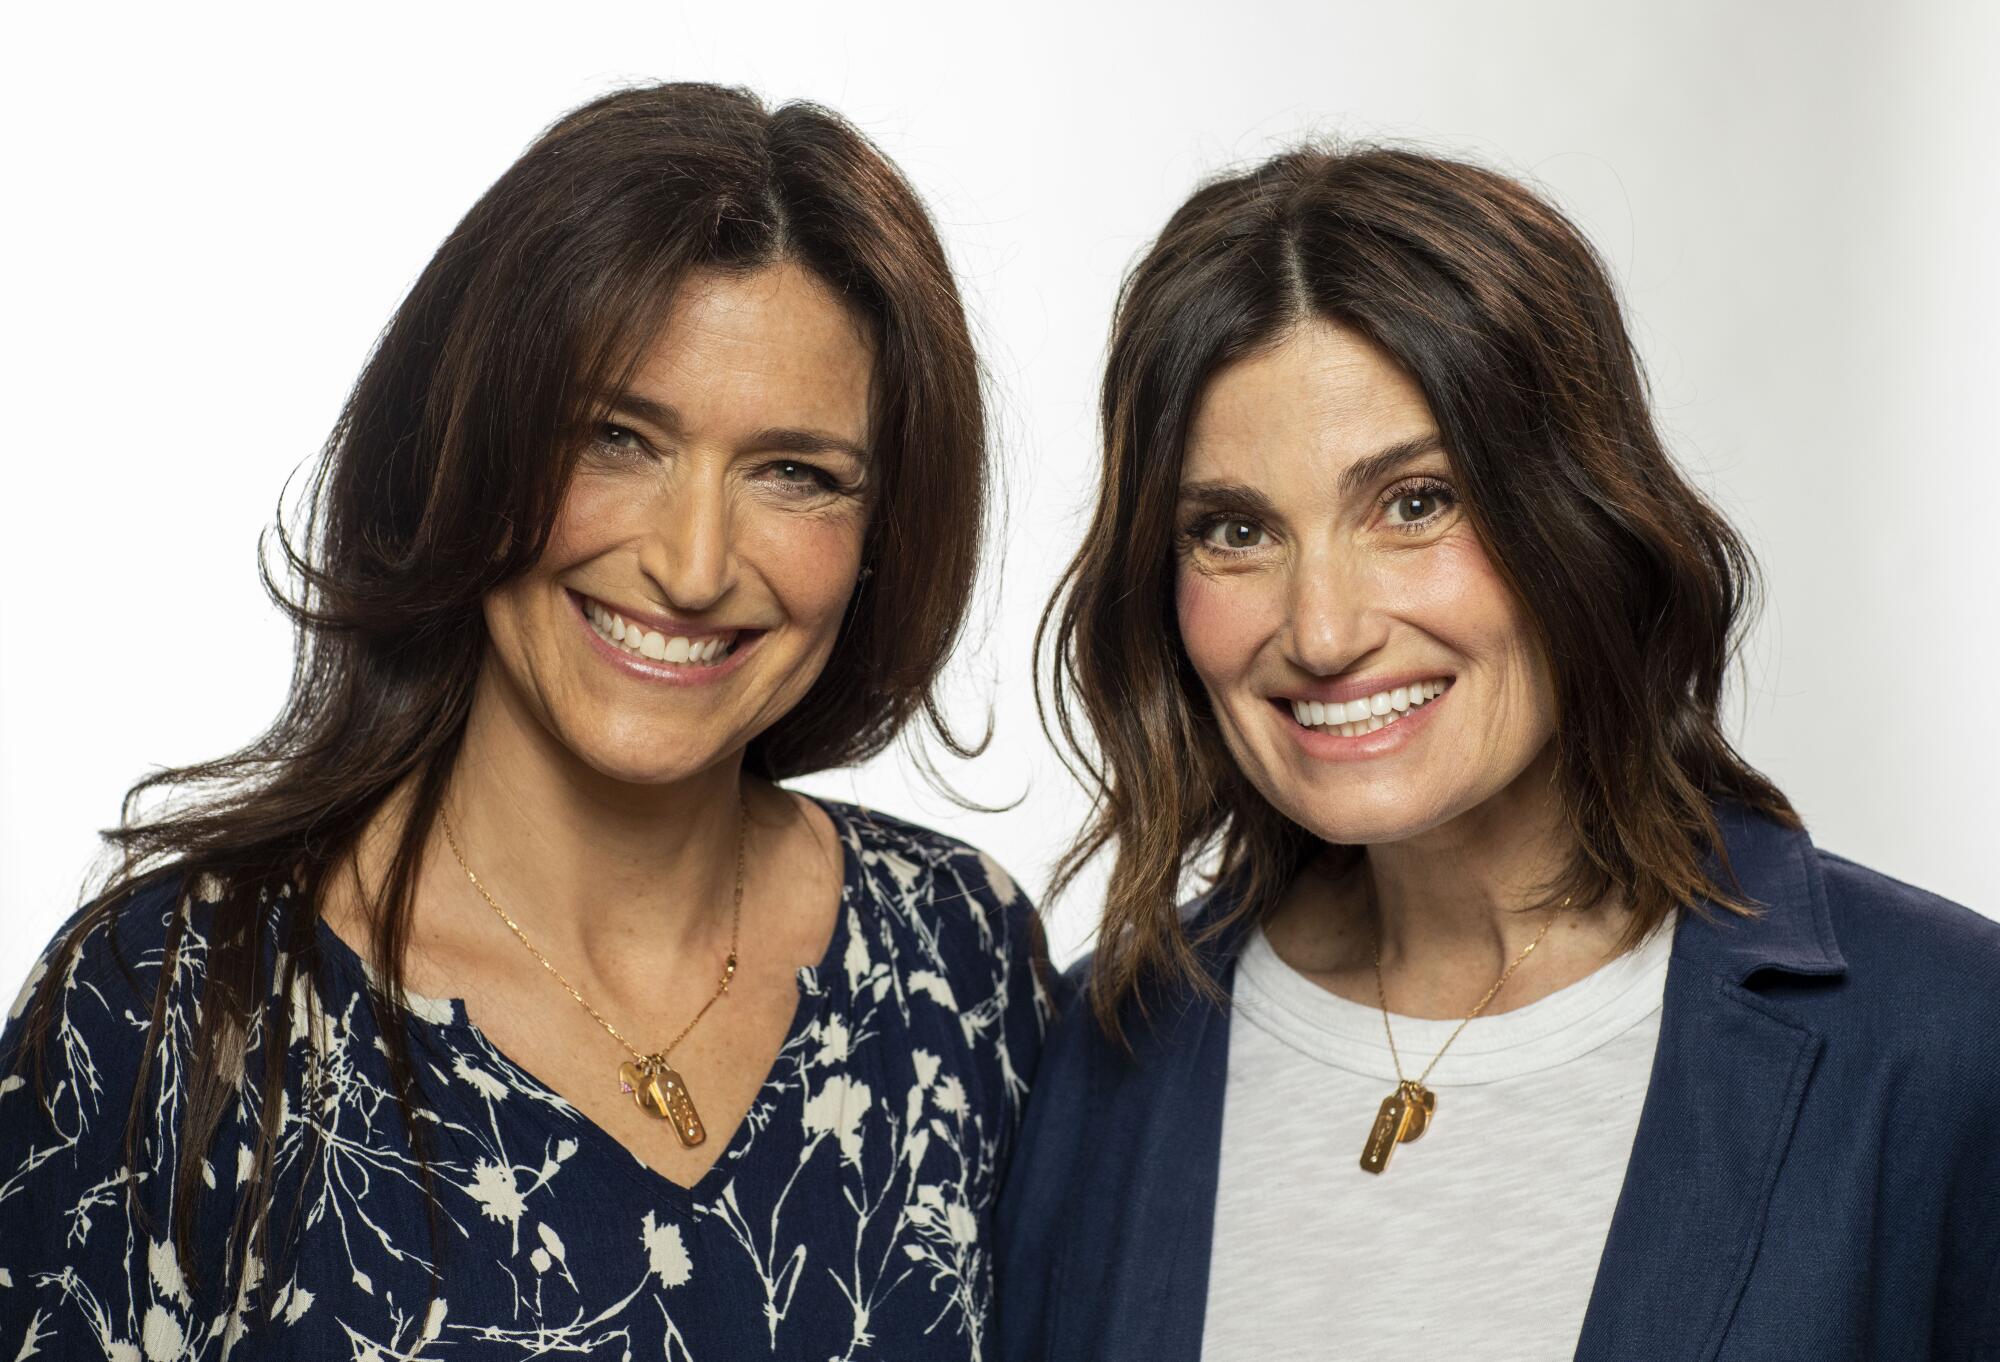 Cara Mentzel and Idina Menzel at the Los Angeles Times Festival of Books portrait studio.